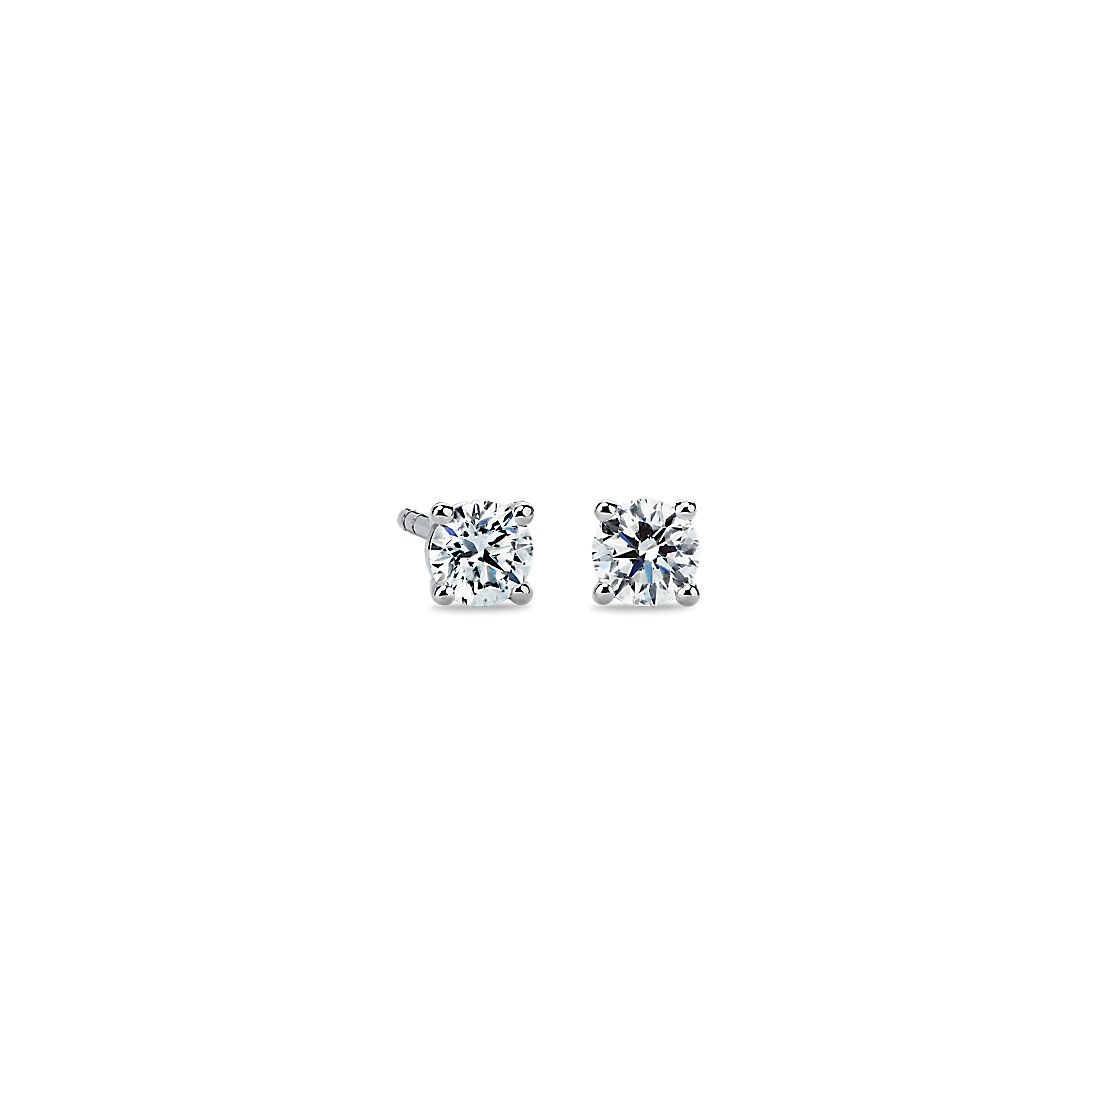 14k White Gold Four-Claw Diamond Stud Earrings (0.46 ct. tw.)